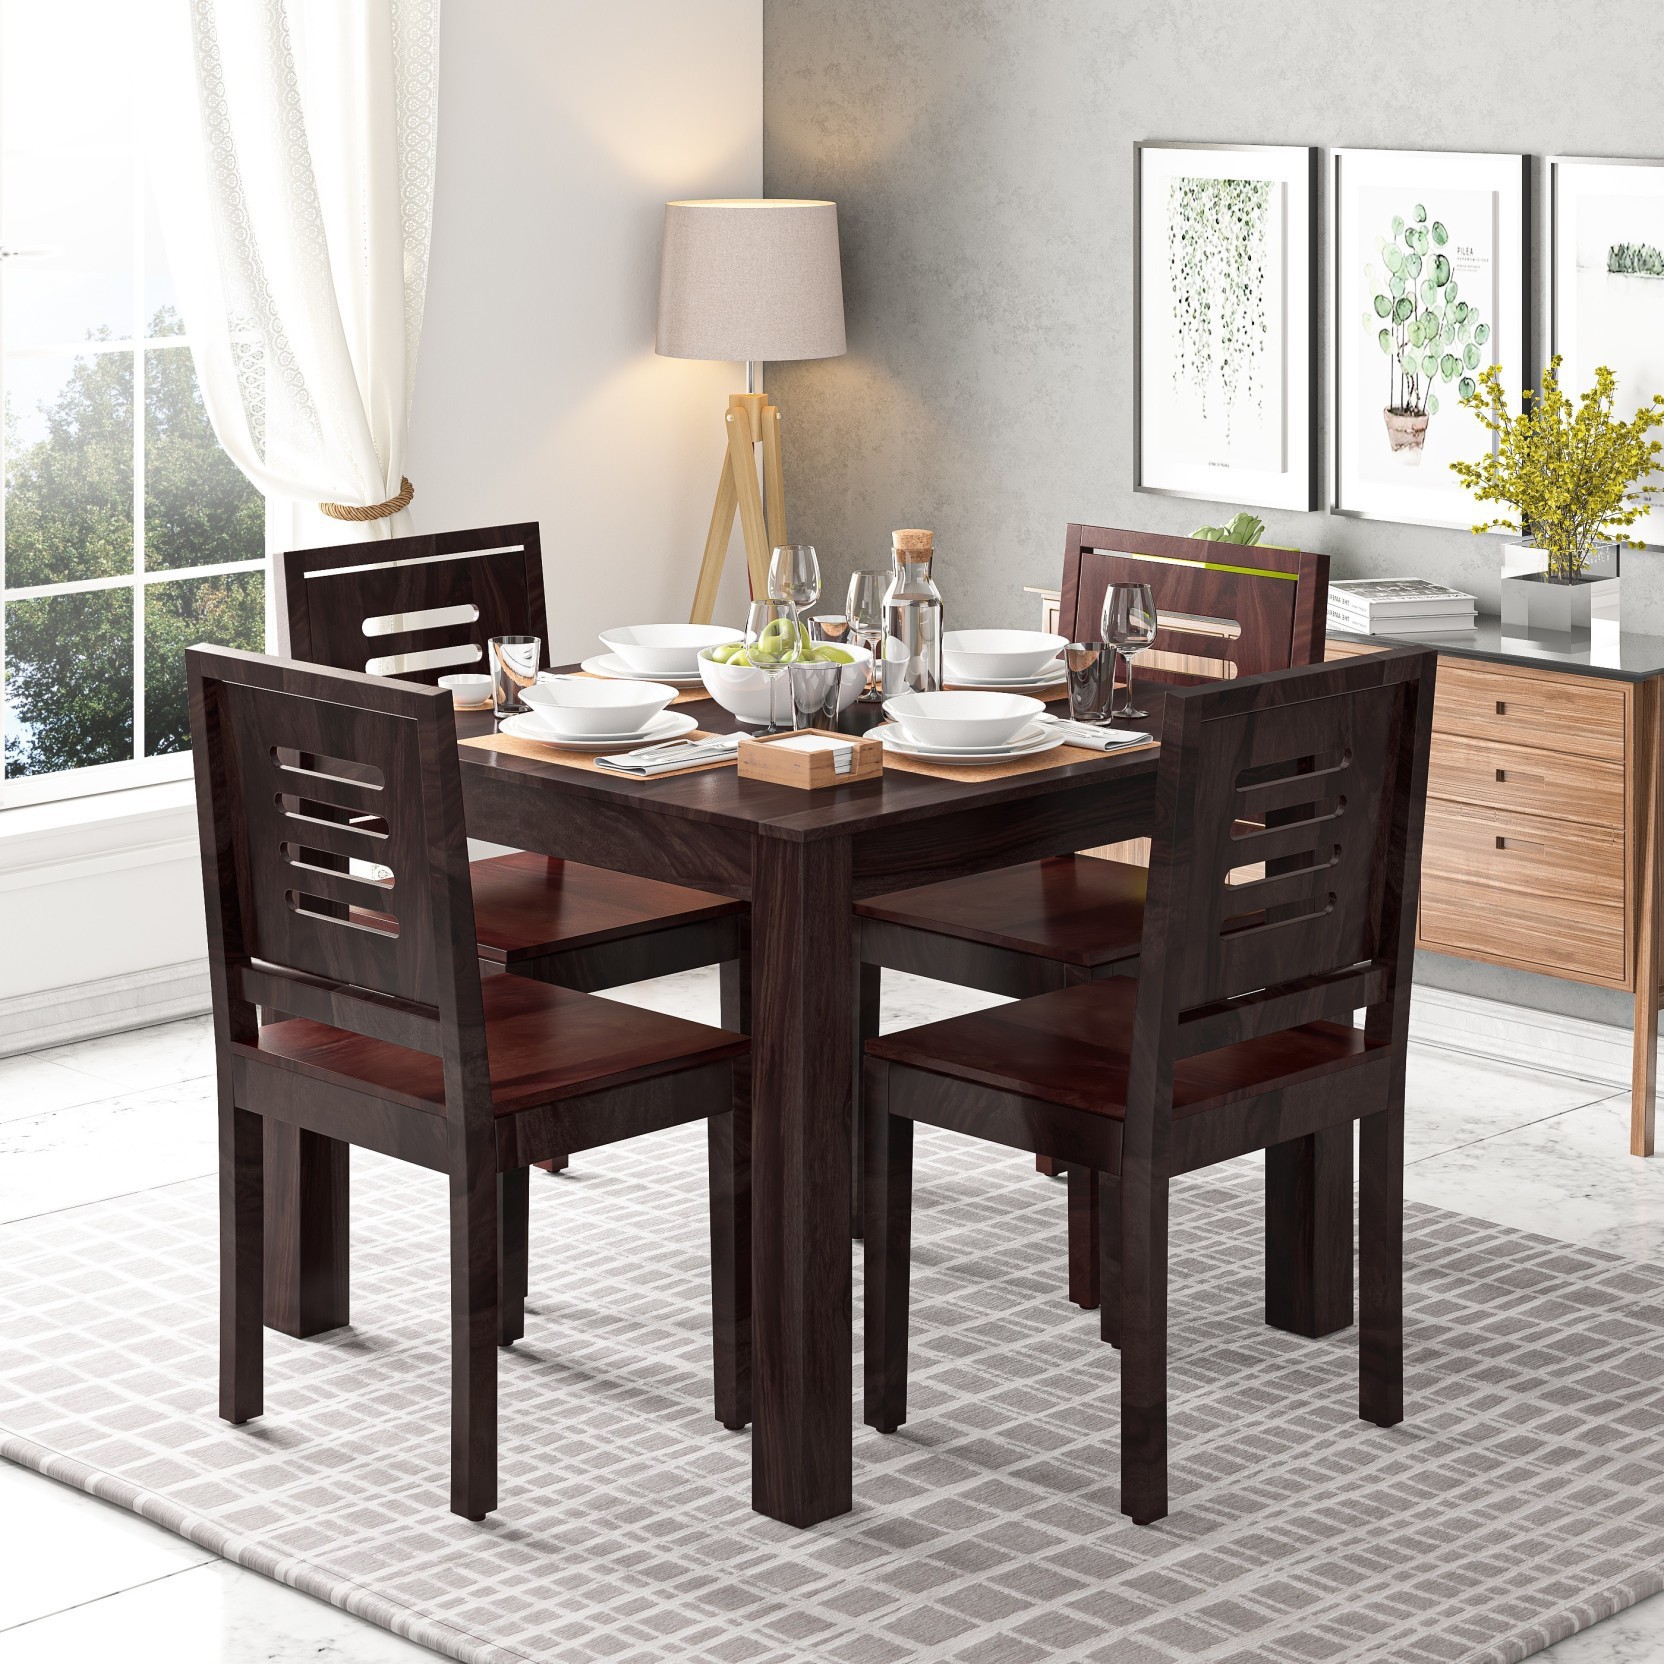 Aaram By Zebrs Dining Table With 4 Chairs For Dining Room Solid Wood 4 Seater Dining Set (Finish Color -Mahogany, DIY(Do-It-Yourself))